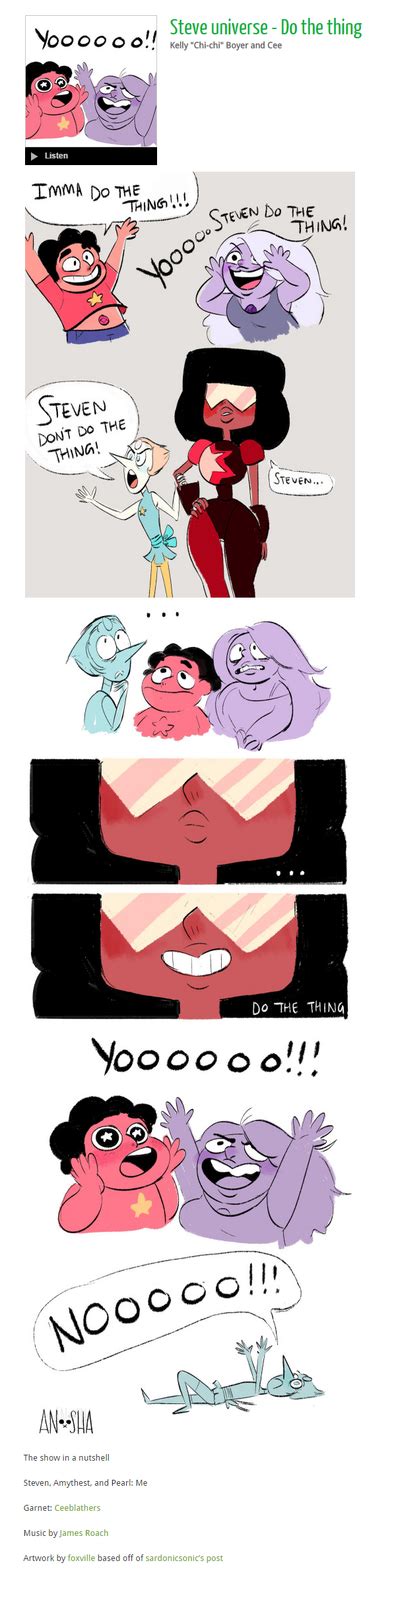 Steven Universe Image Gallery Sorted By Views List View Memes De Steven Universe Steven